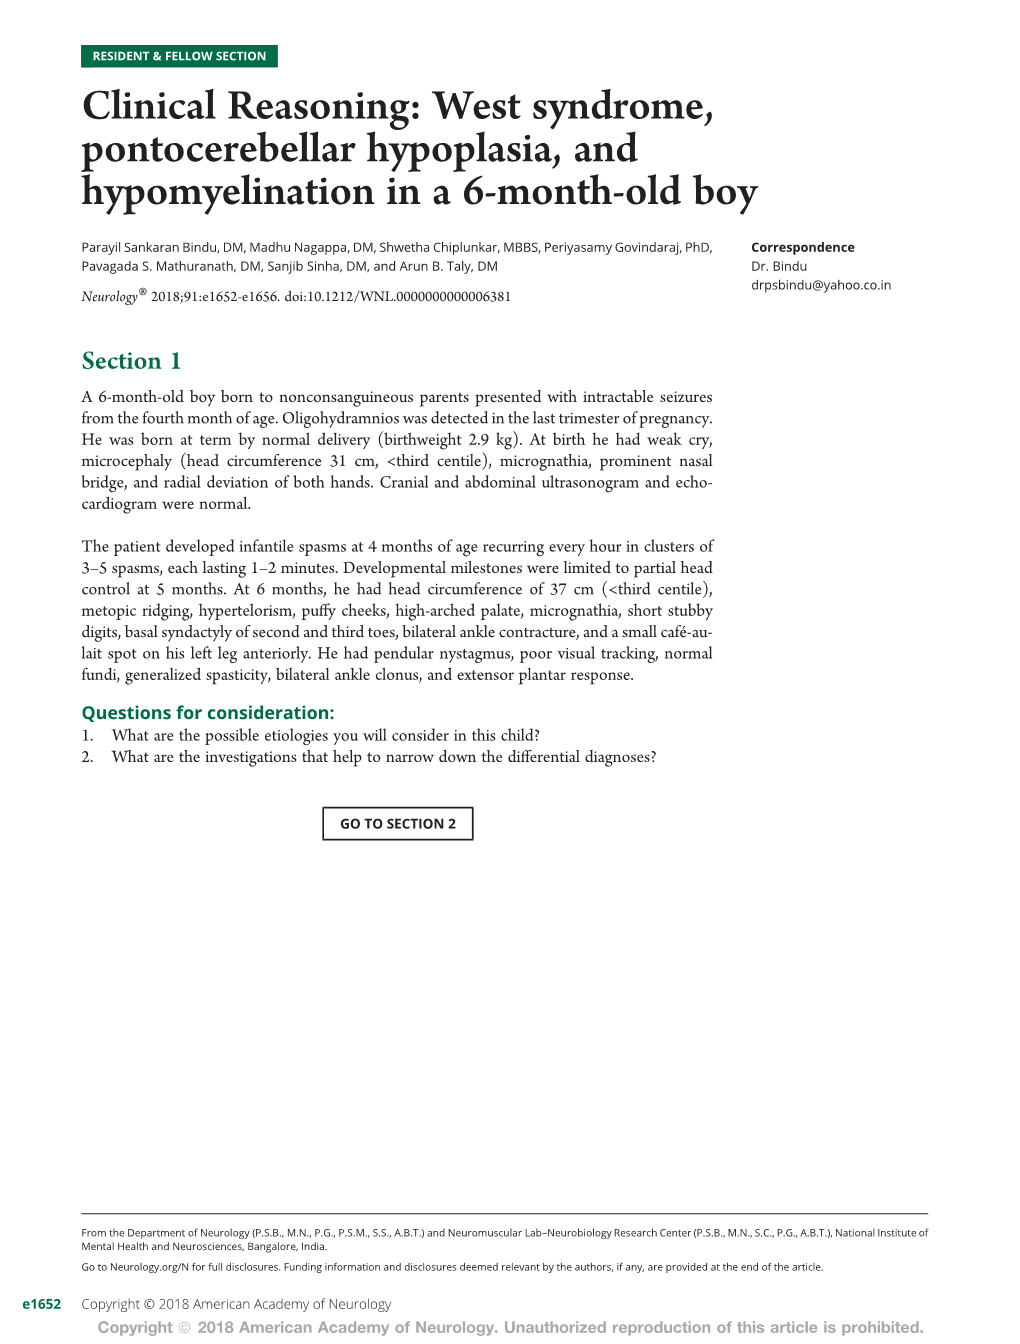 West Syndrome, Pontocerebellar Hypoplasia, and Hypomyelination in a 6-Month-Old Boy